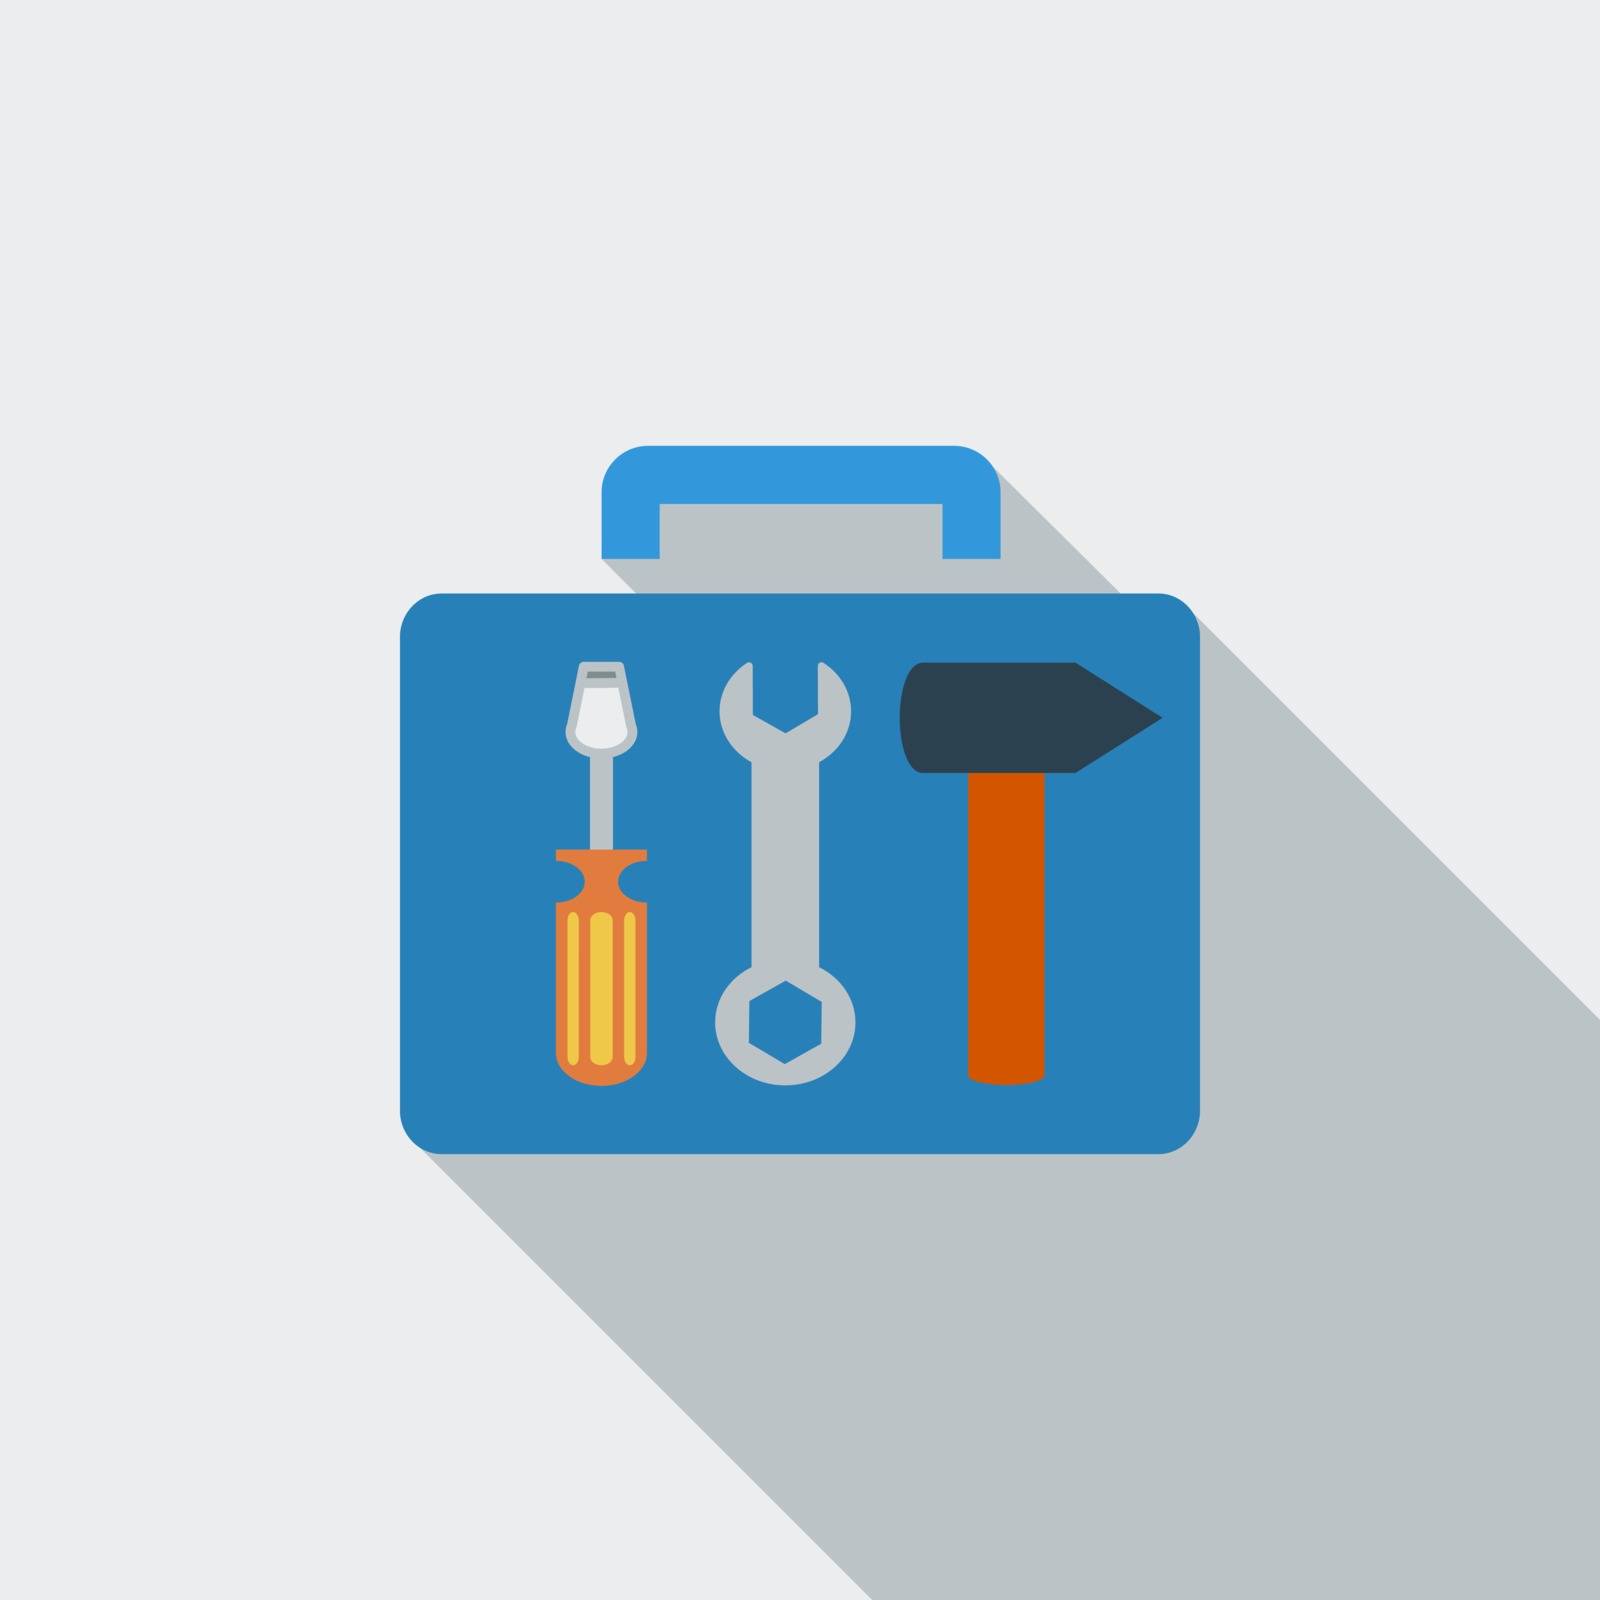 Tool box icon. Flat vector related icon with long shadow for web and mobile applications. It can be used as - logo, pictogram, icon, infographic element. Vector Illustration.